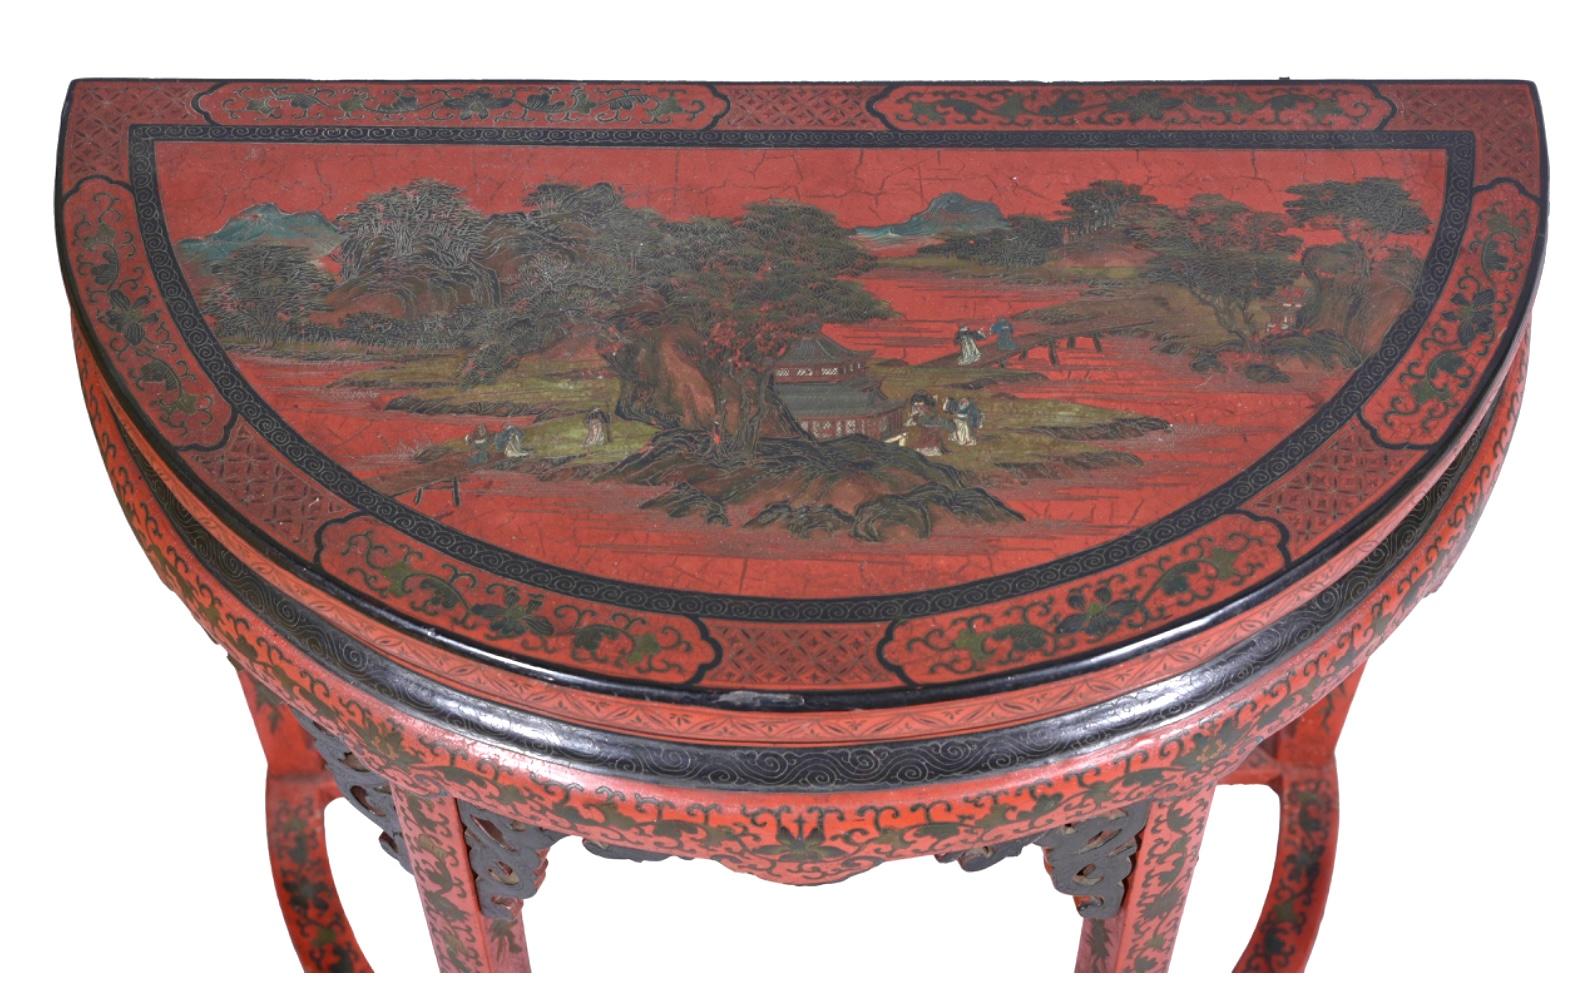 19th century Chinese red chinoiserie demilune console table with hand-painted Asian scenes of trees, houses and Chinese characters in olive and black on red colors. Legs and top are decorated with black scrolling. Table is versatile enough to be